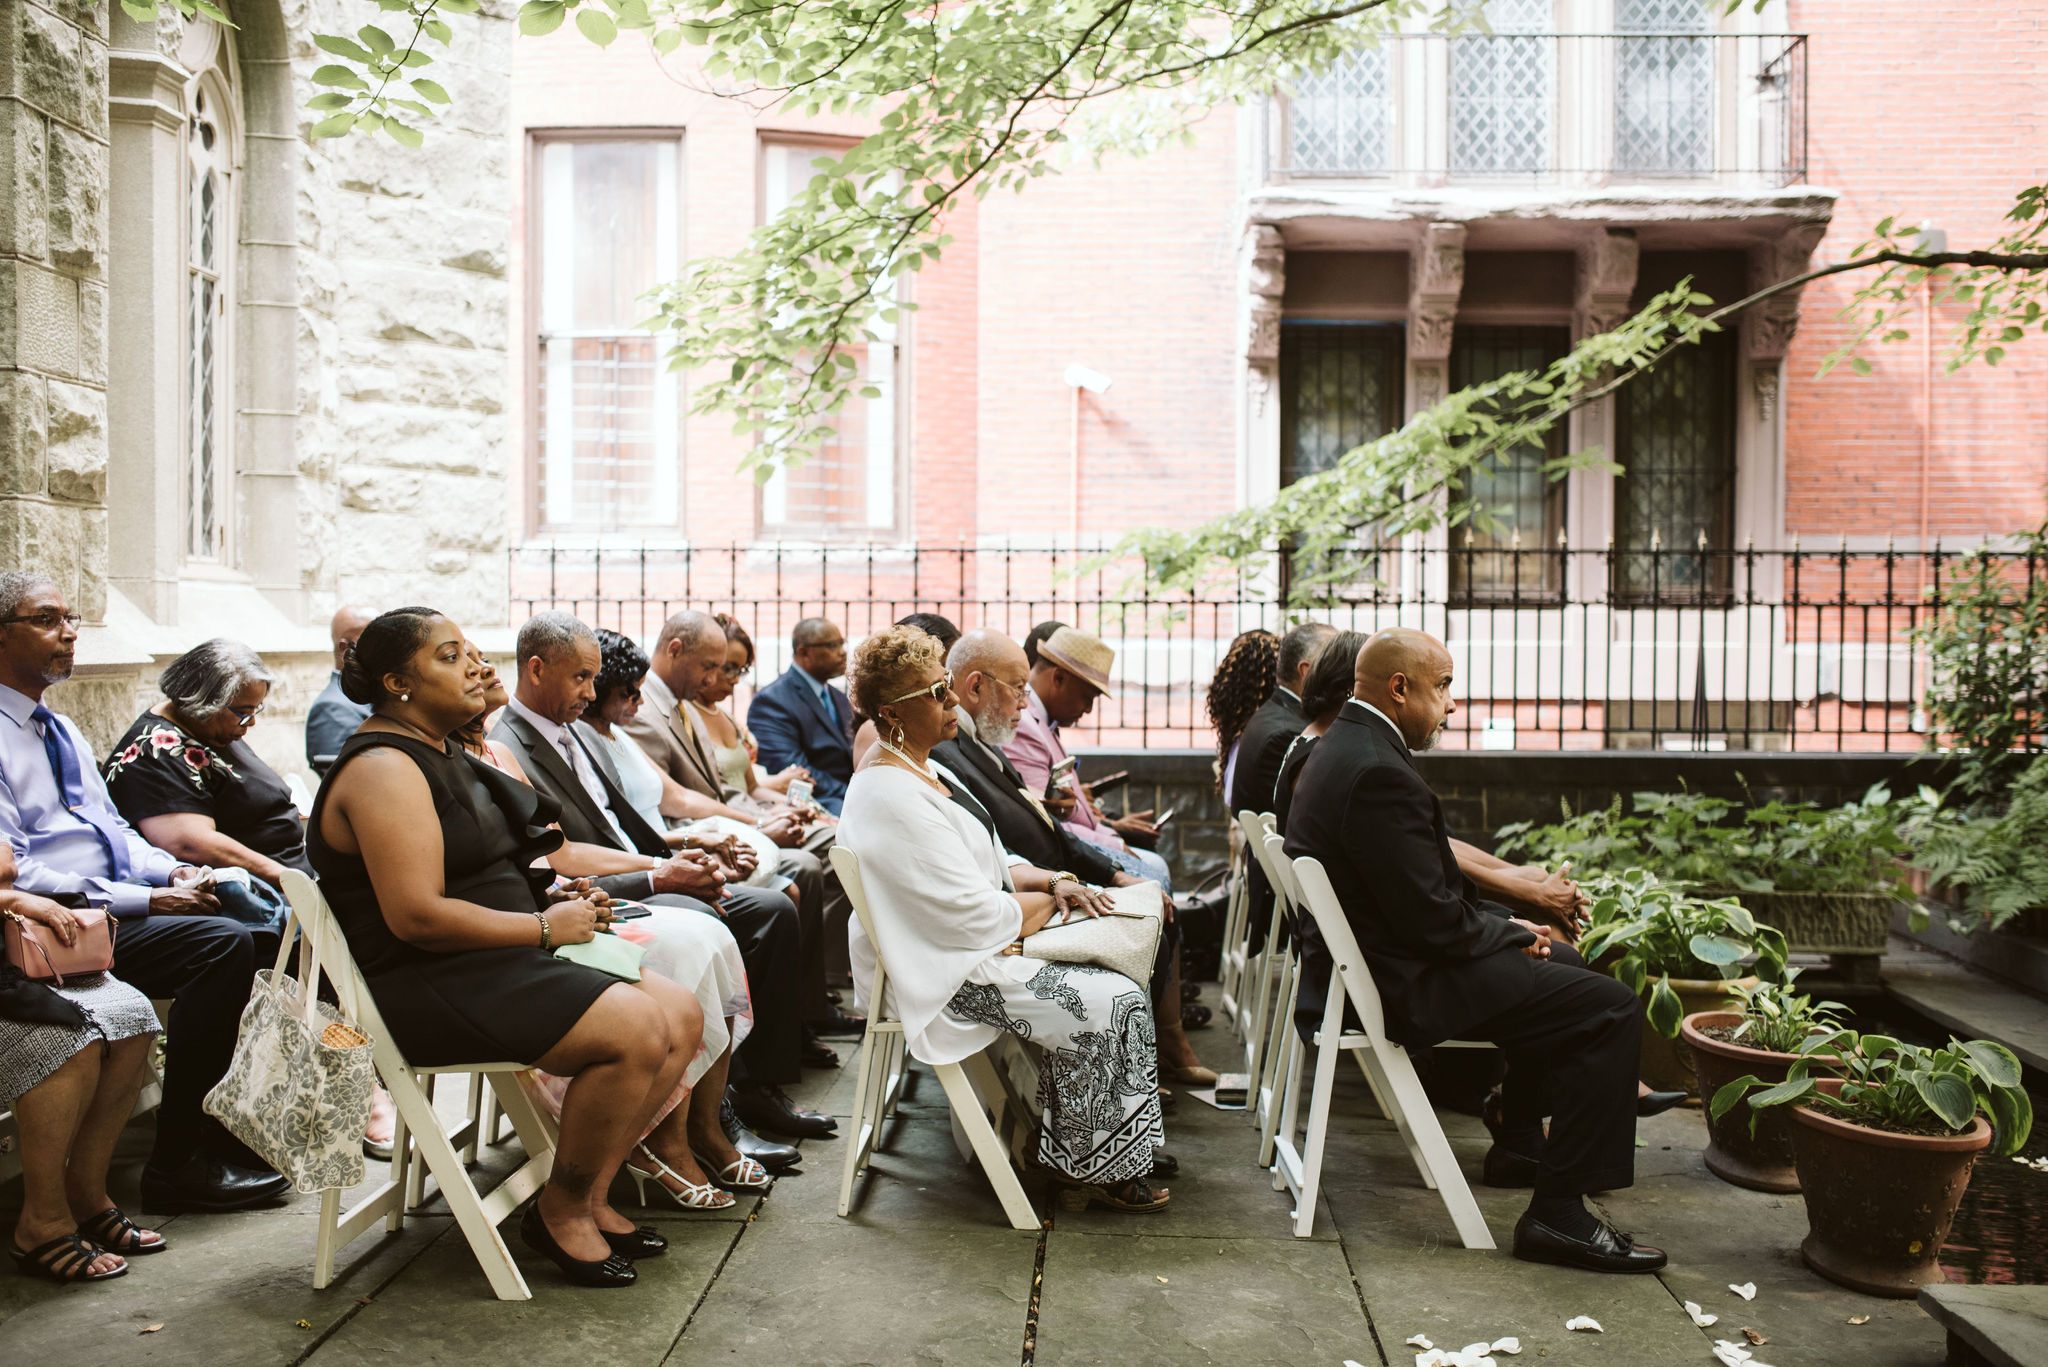  Baltimore, Maryland Wedding Photographer, Mount Vernon, Chase Court, Classic, Outdoor Ceremony, Garden, Romantic, Wedding Guests Praying During Ceremony 